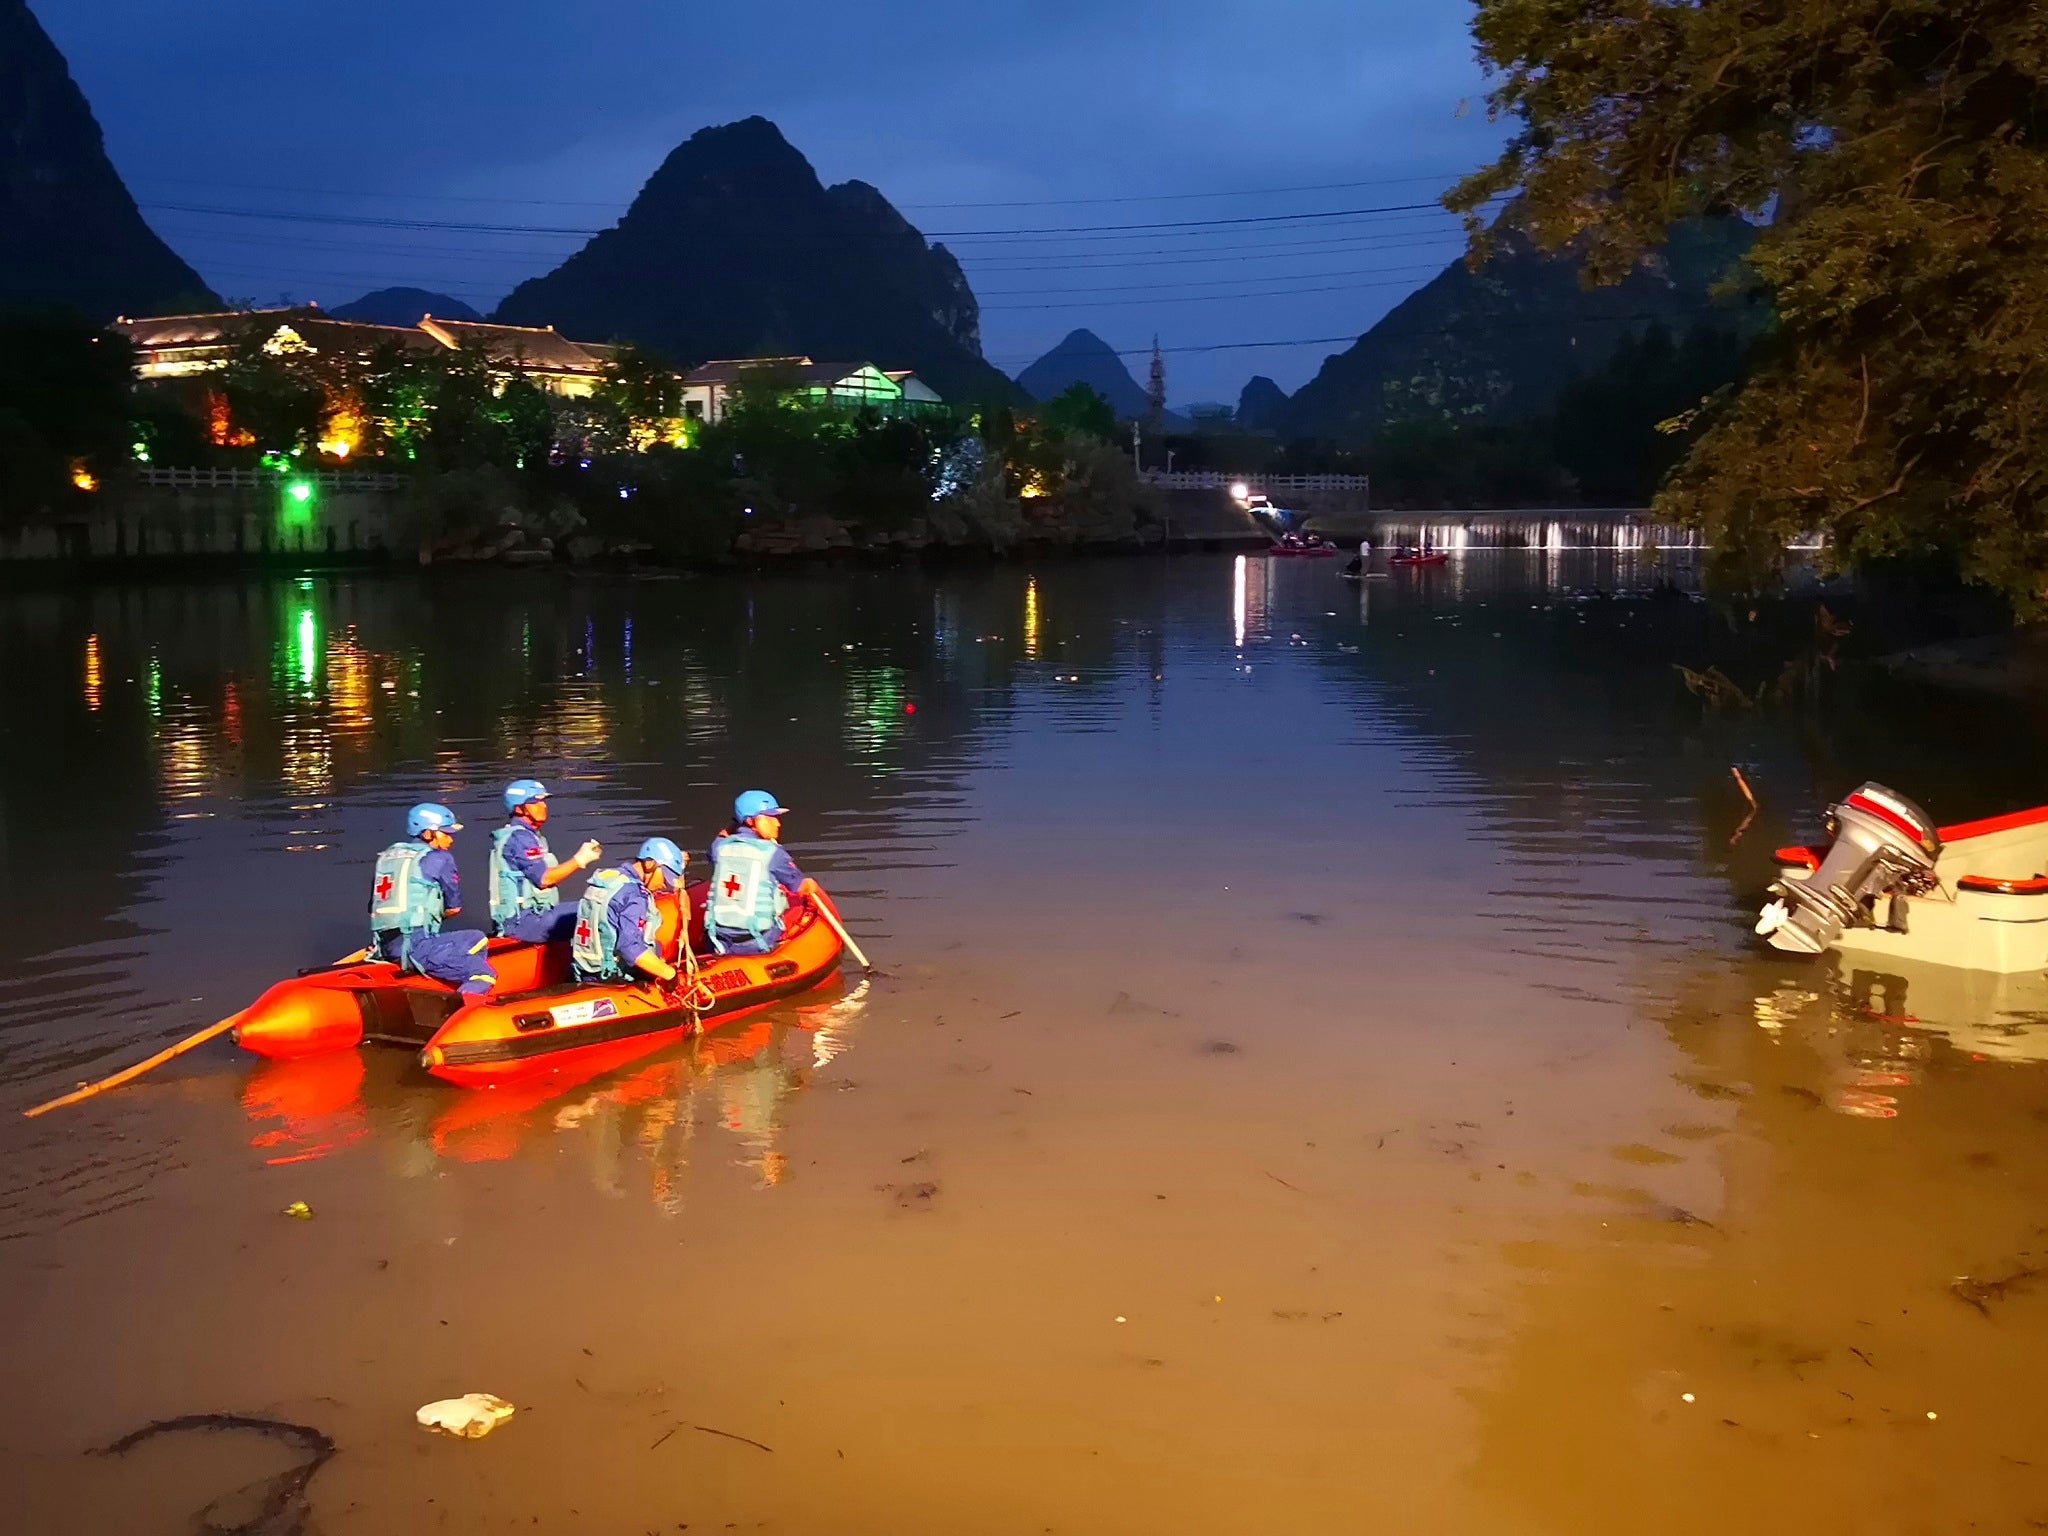 China dragon boats accident: 17 people die after rowboats capsize in strong current